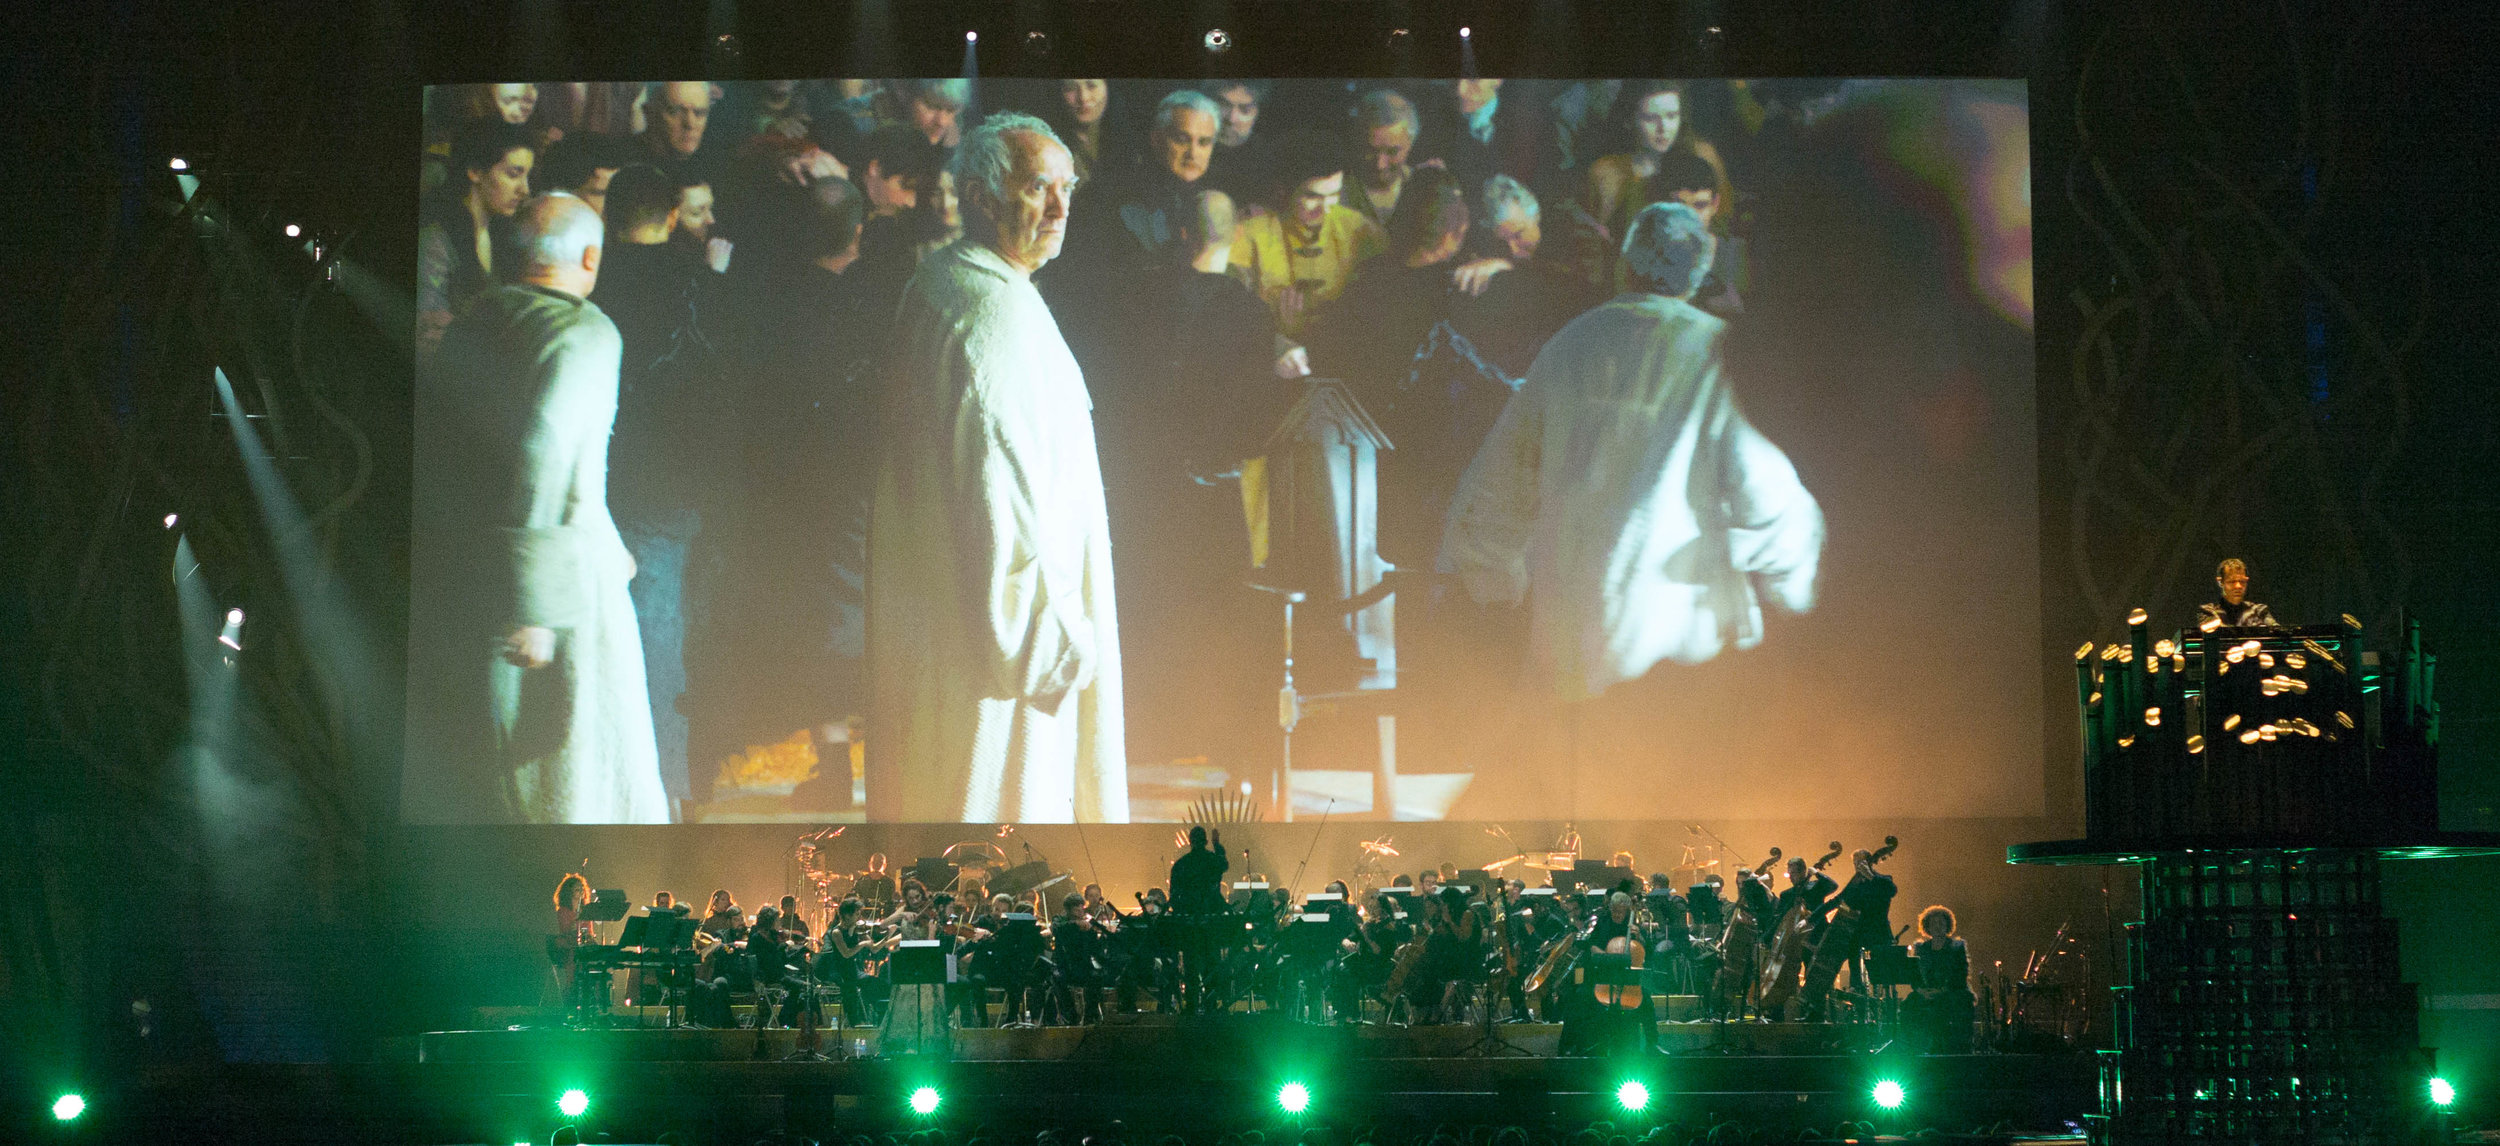 Game Of Thrones Live Concert Experience, Madrid 2018